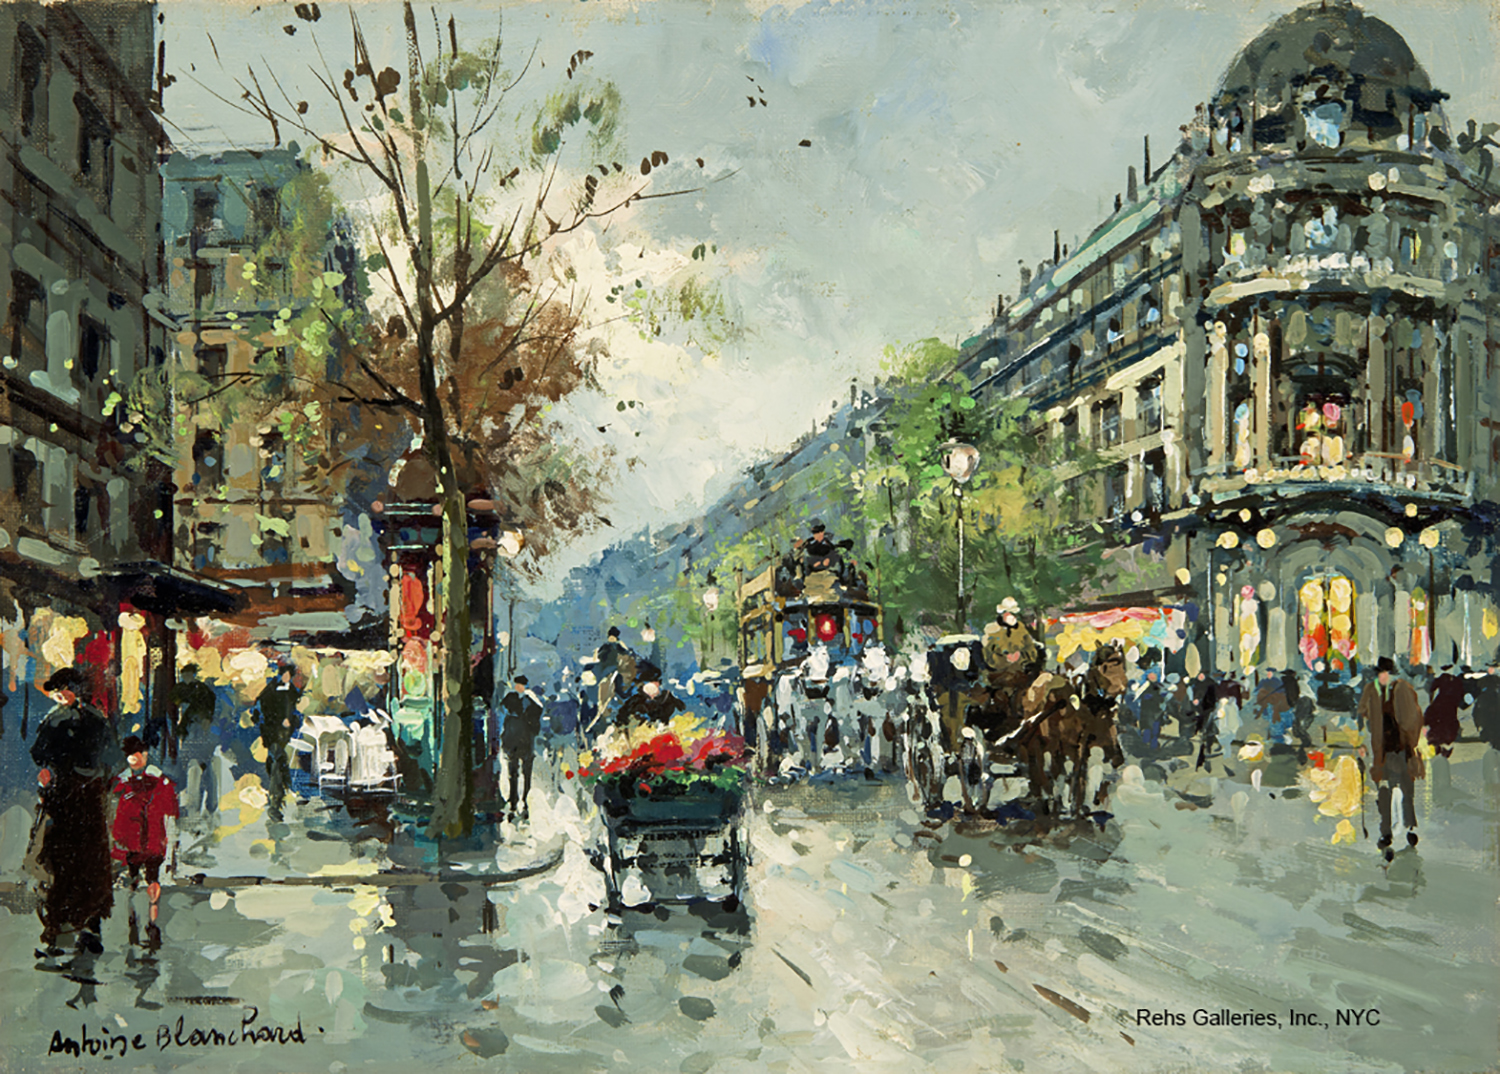 painting of the vaudeville theater in paris